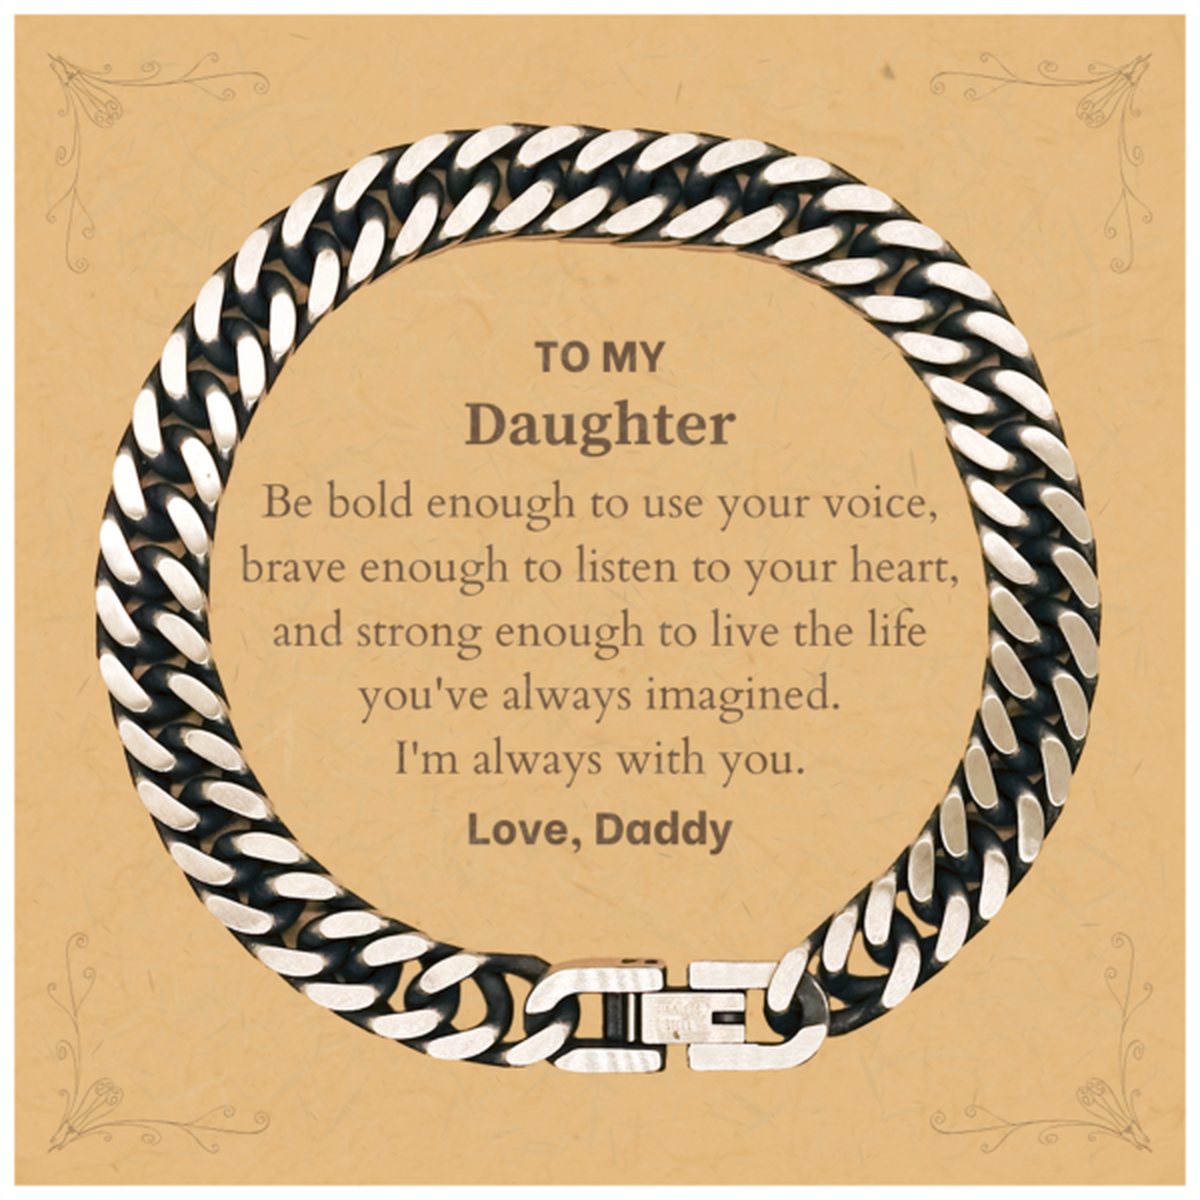 Keepsake Daughter Cuban Link Chain Bracelet Gift Idea Graduation Christmas Birthday Daughter from Daddy, Daughter Be bold enough to use your voice, brave enough to listen to your heart. Love, Daddy